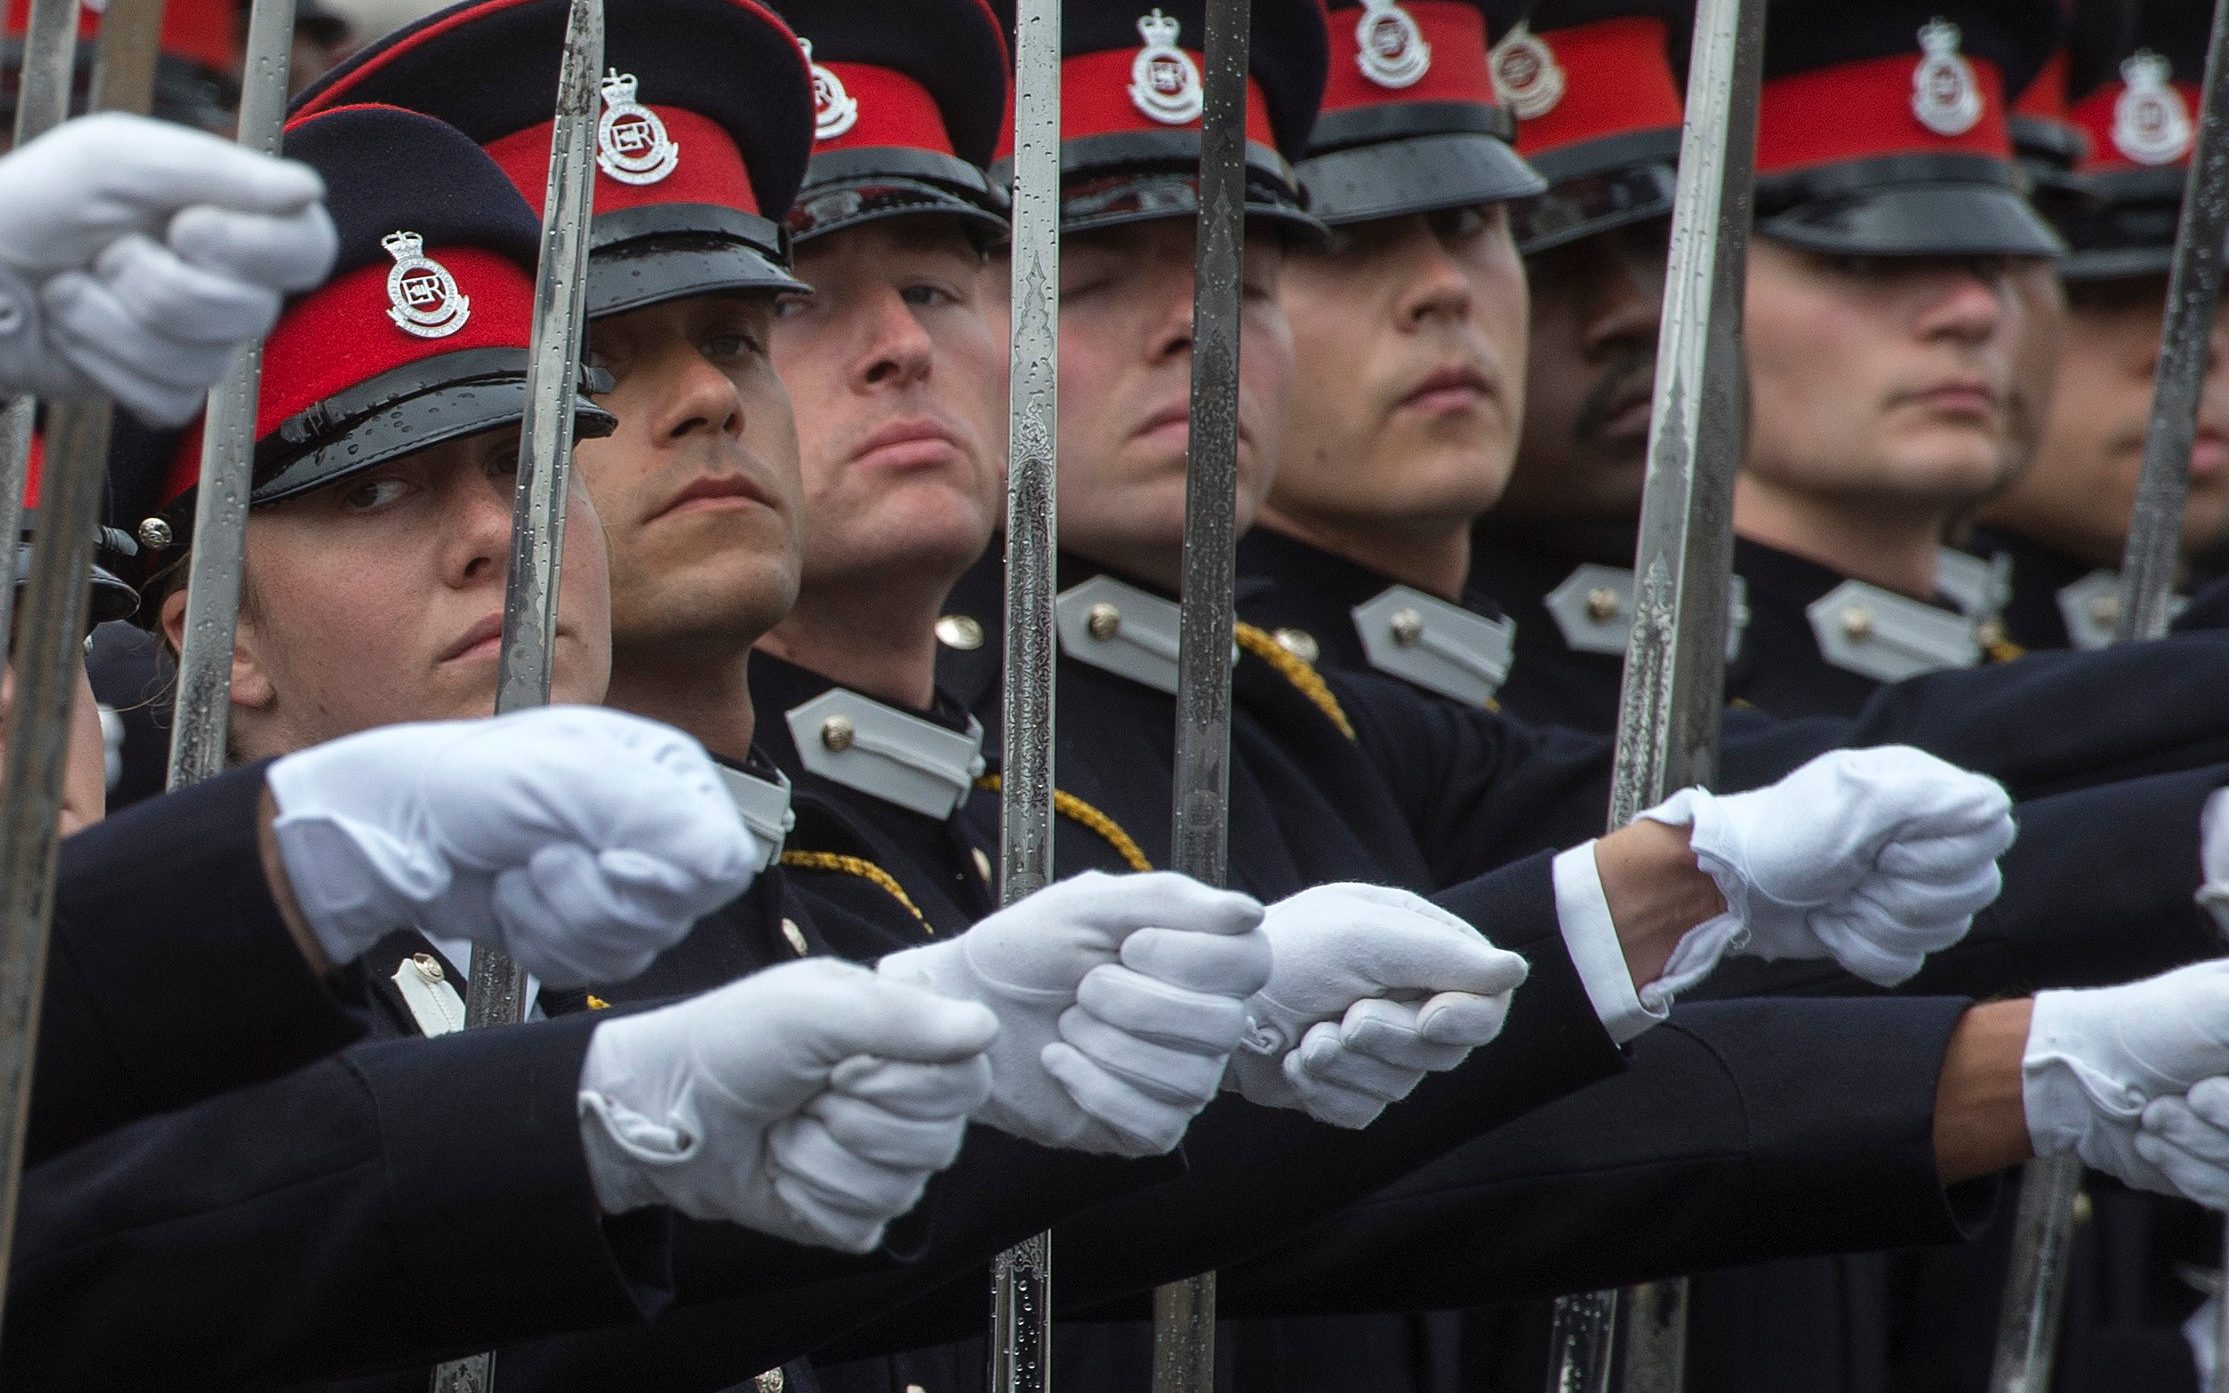 armed forces’ £8m diversity drive has failed to put minorities in top positions